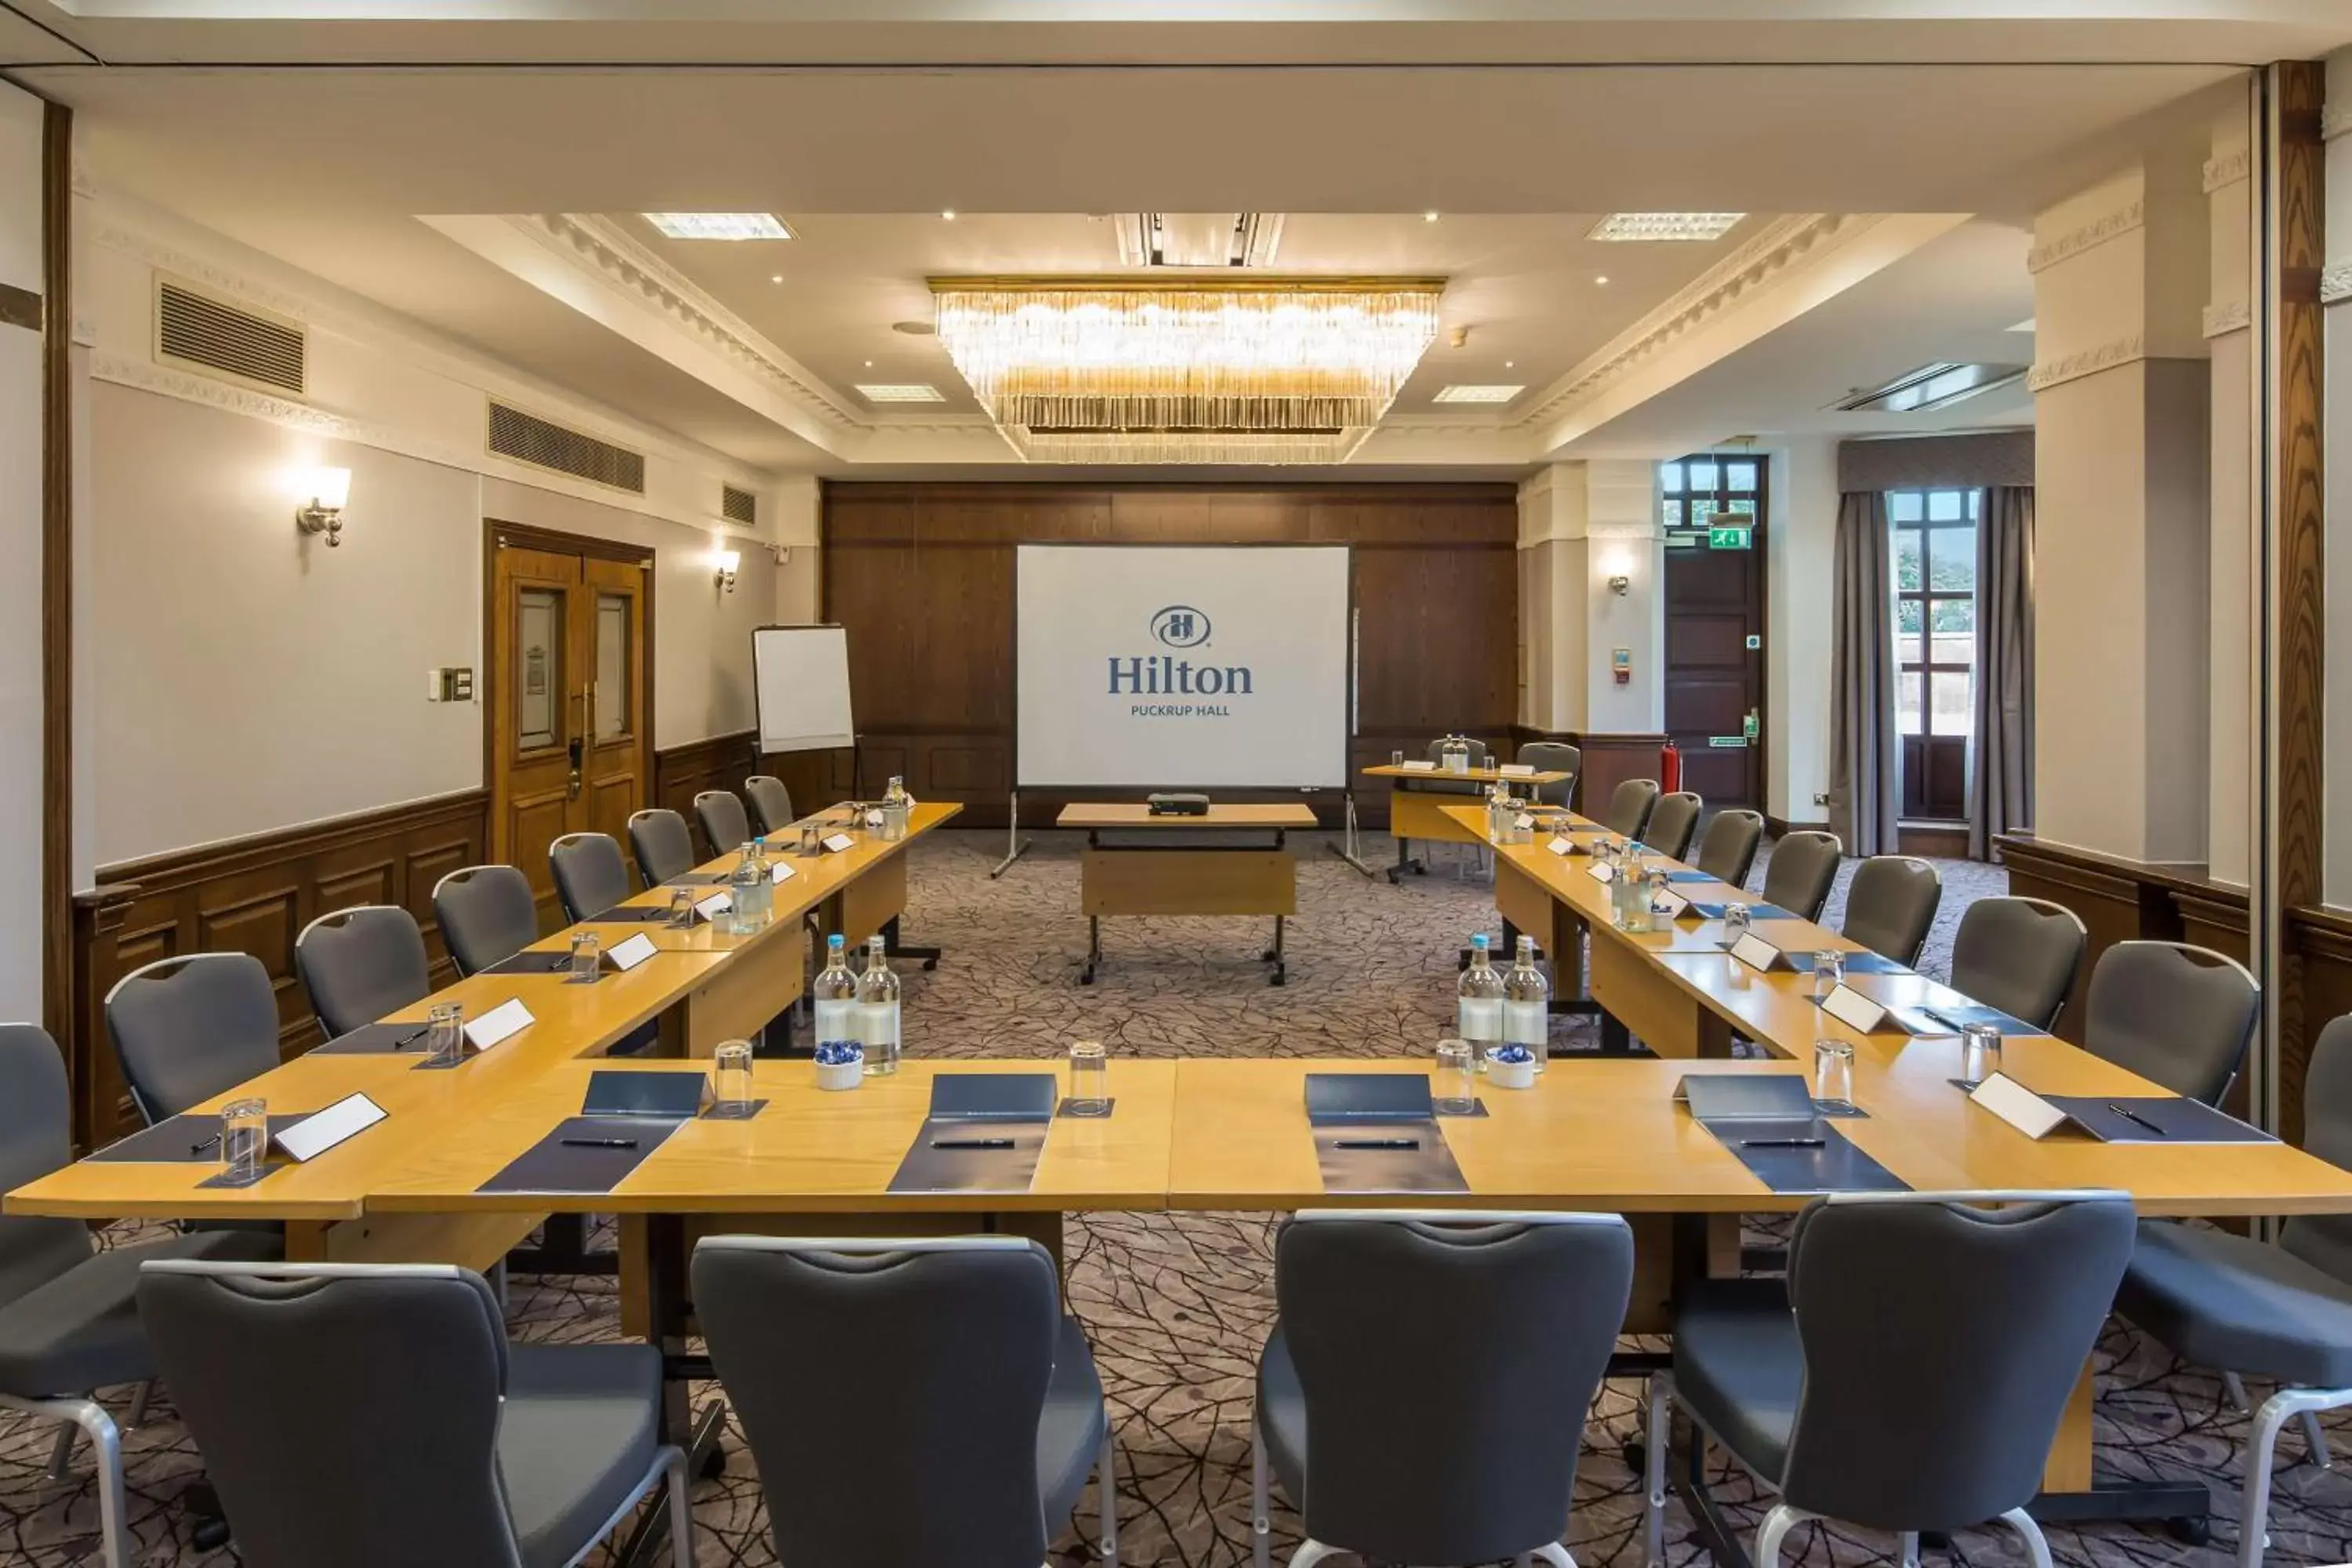 Meeting/conference room, Business Area/Conference Room in Hilton Puckrup Hall, Tewkesbury